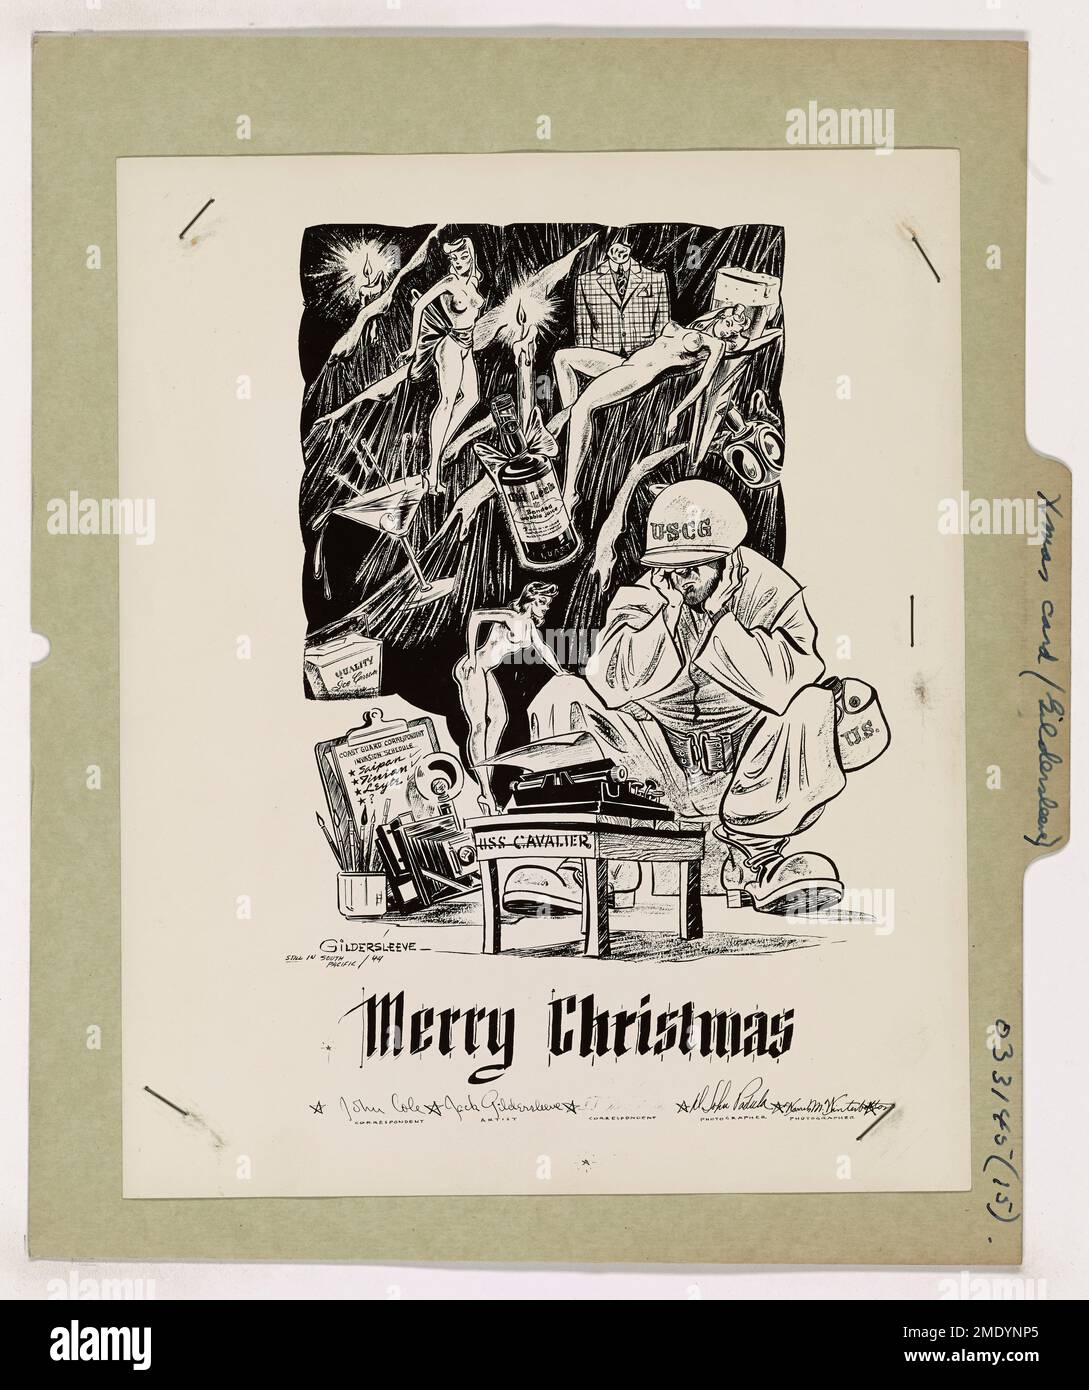 Merry Christmas. This image depicts artwork of a Christmas card, drawn by Coast Guard Combat Artist Jack B. Gildersleeve. Stock Photo